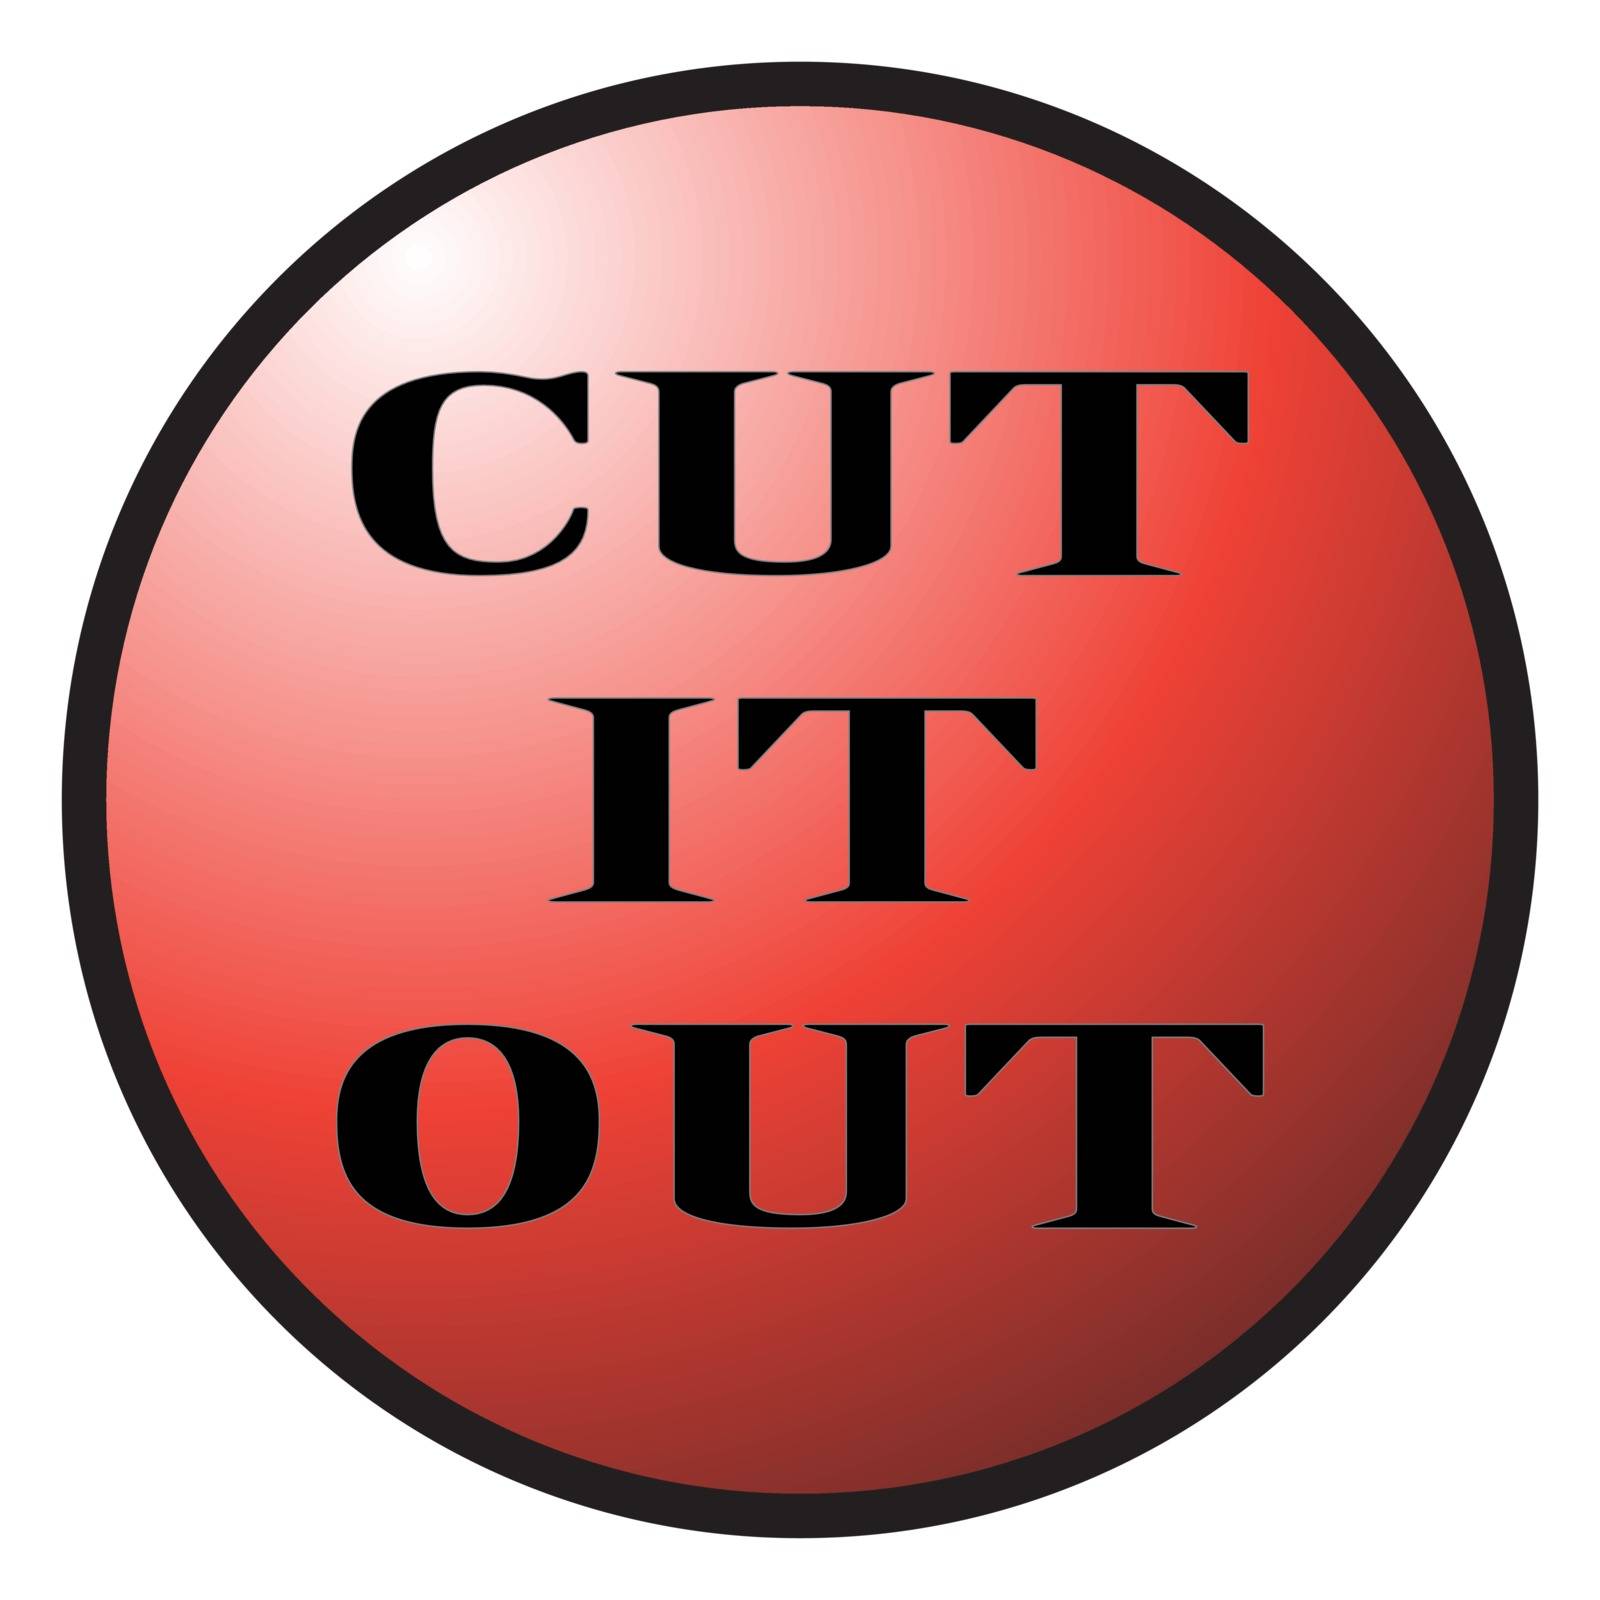 A big red button saying 'CUT IT OUT' and isolated on a white background